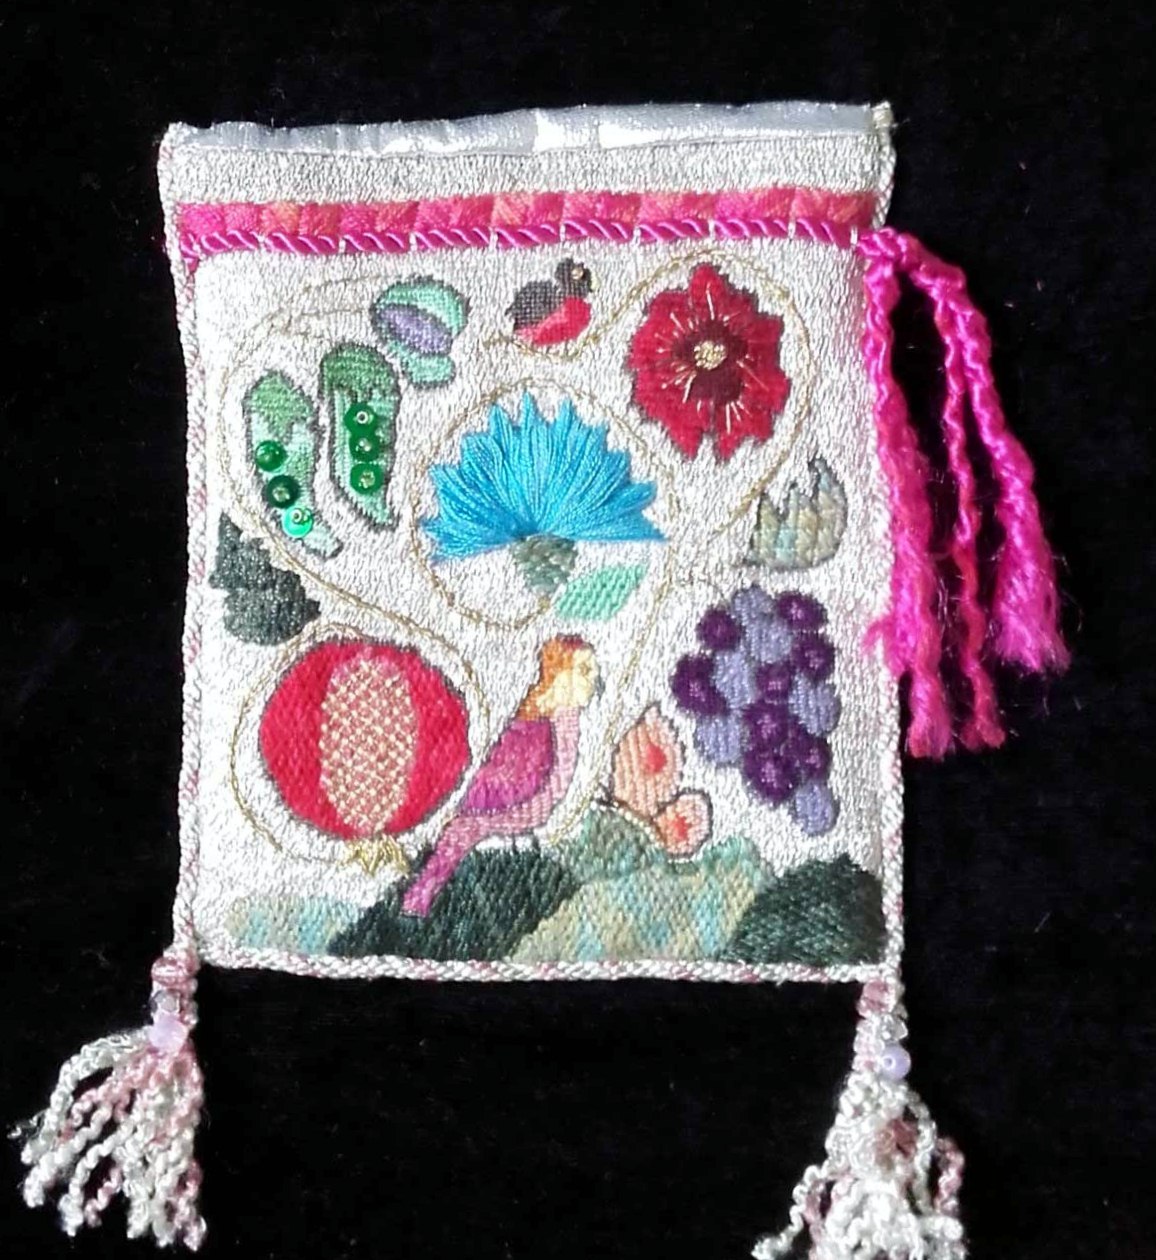 SILVER SWEETIE BAG by Mal Ralston, hand embroidery, MEG display at NW Regional Day 2021